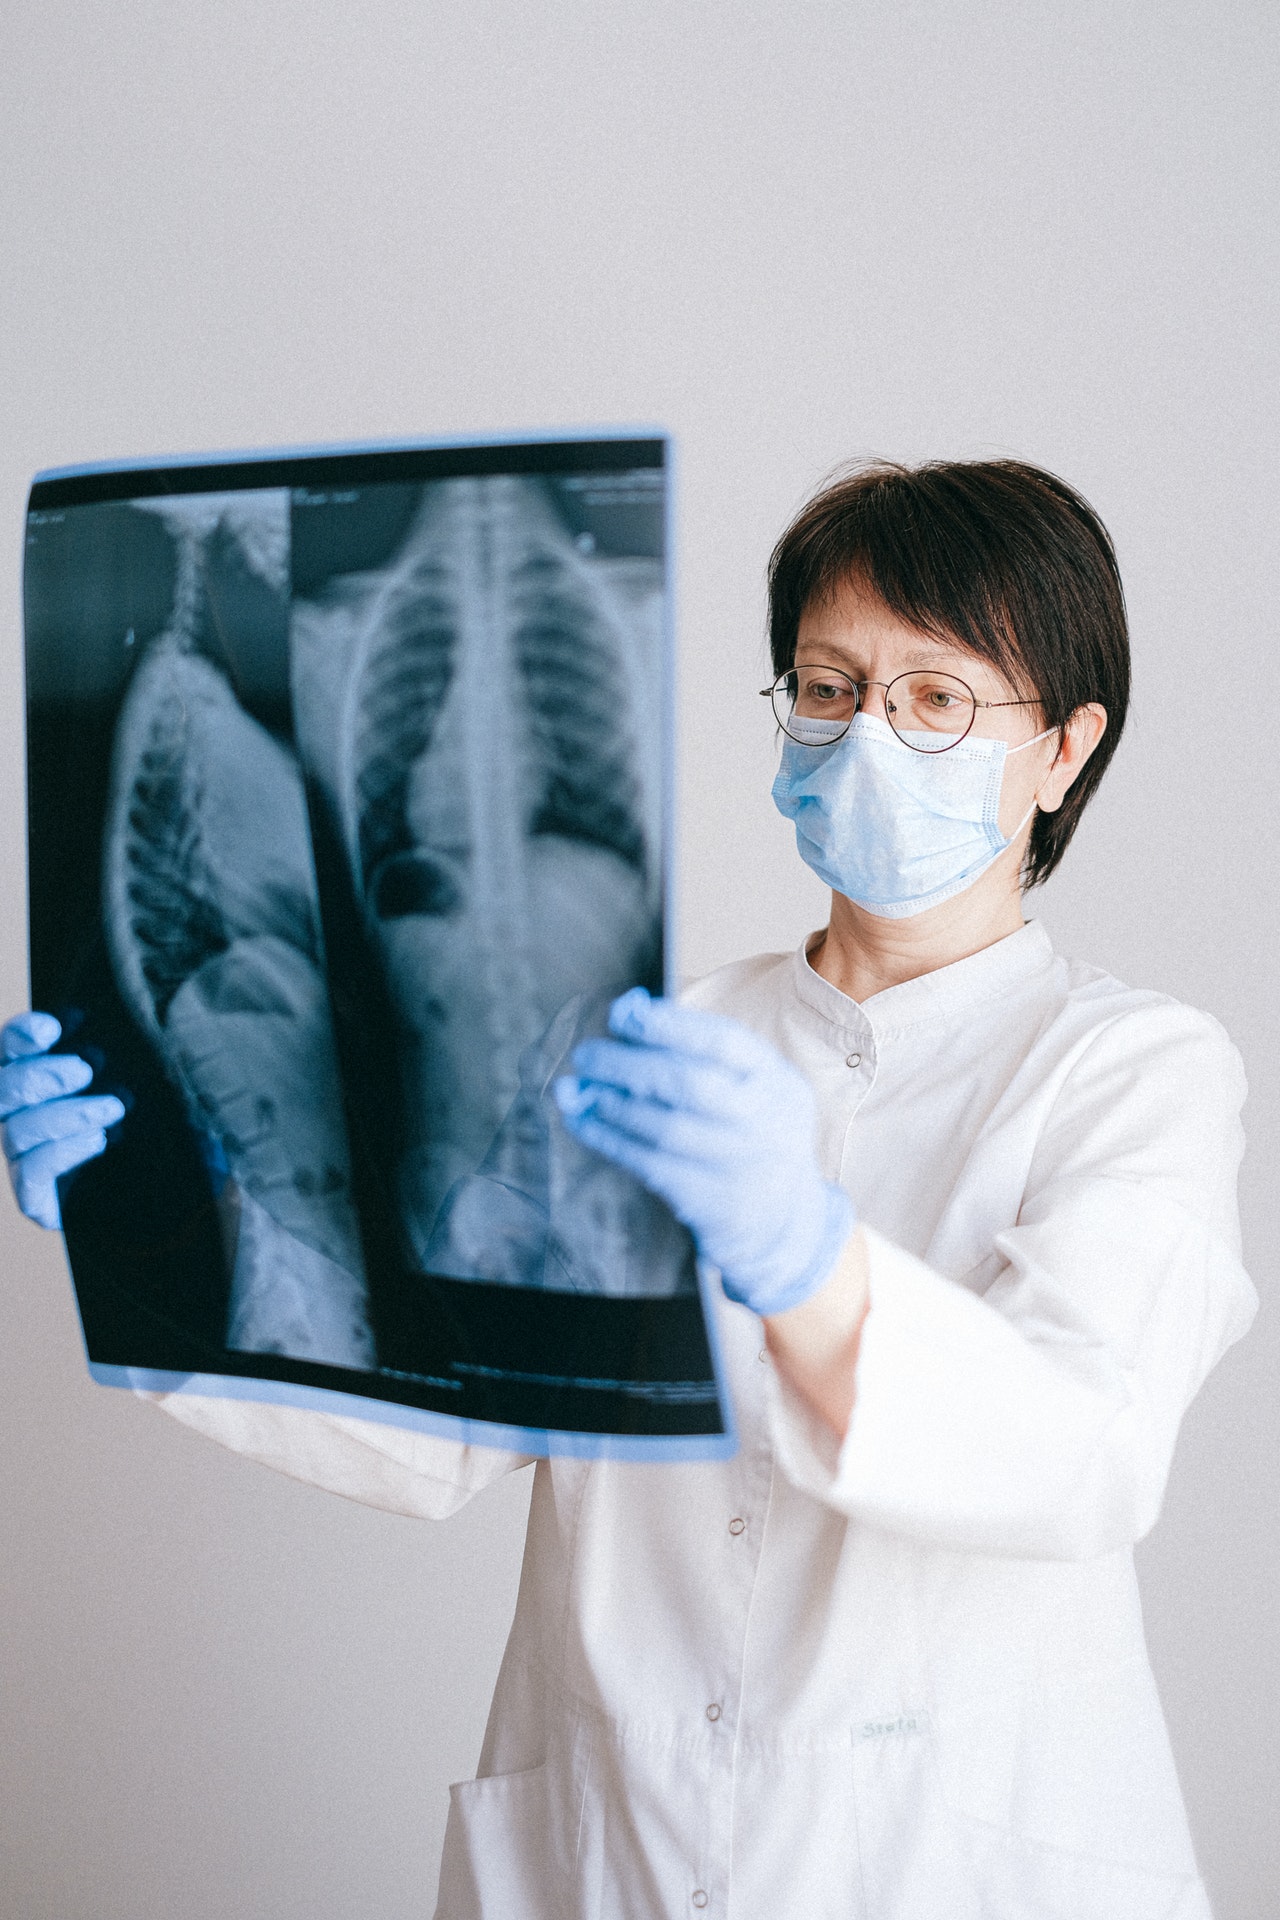 A doctor is holding and looking at human X-ray results